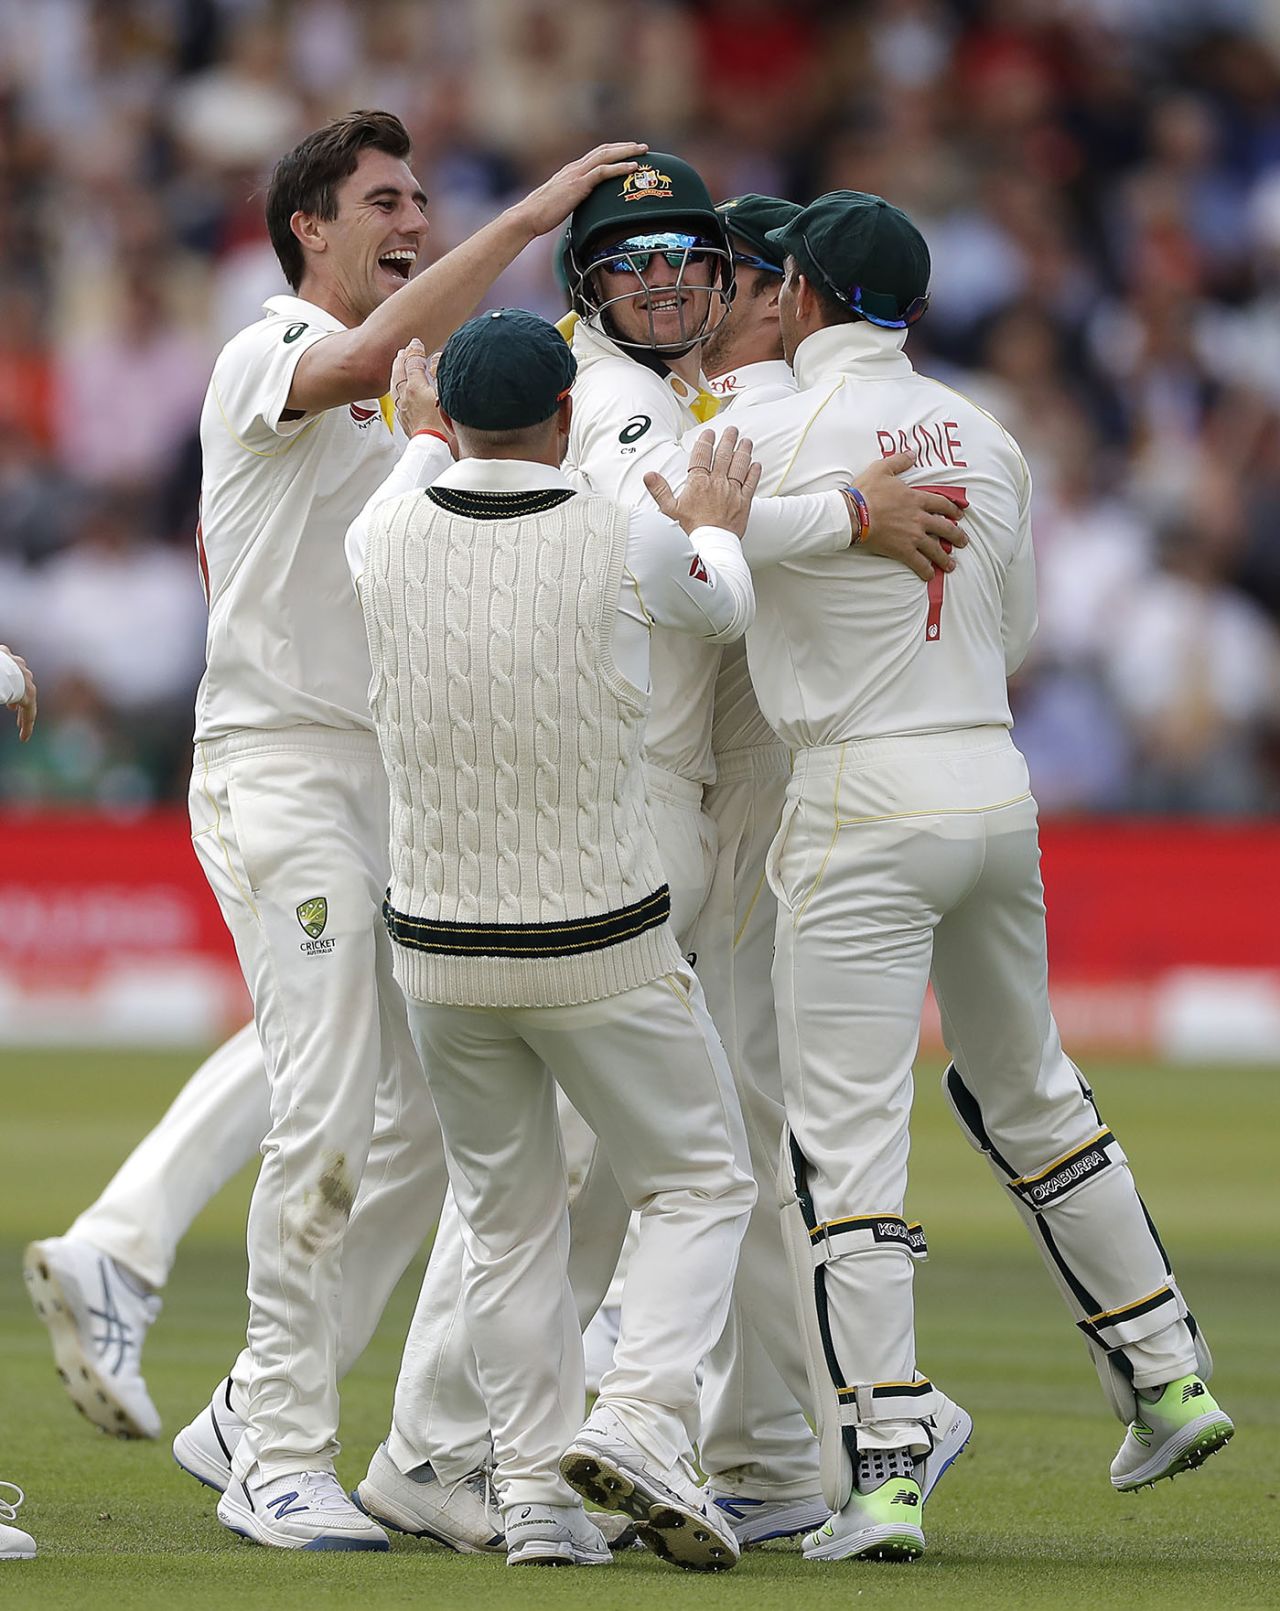 Australia mob Cameron Bancroft after his brilliant short-leg catch to dismiss Rory Burns, England v Australia, 2nd Test, Lord's, 2nd day, August 15, 2019